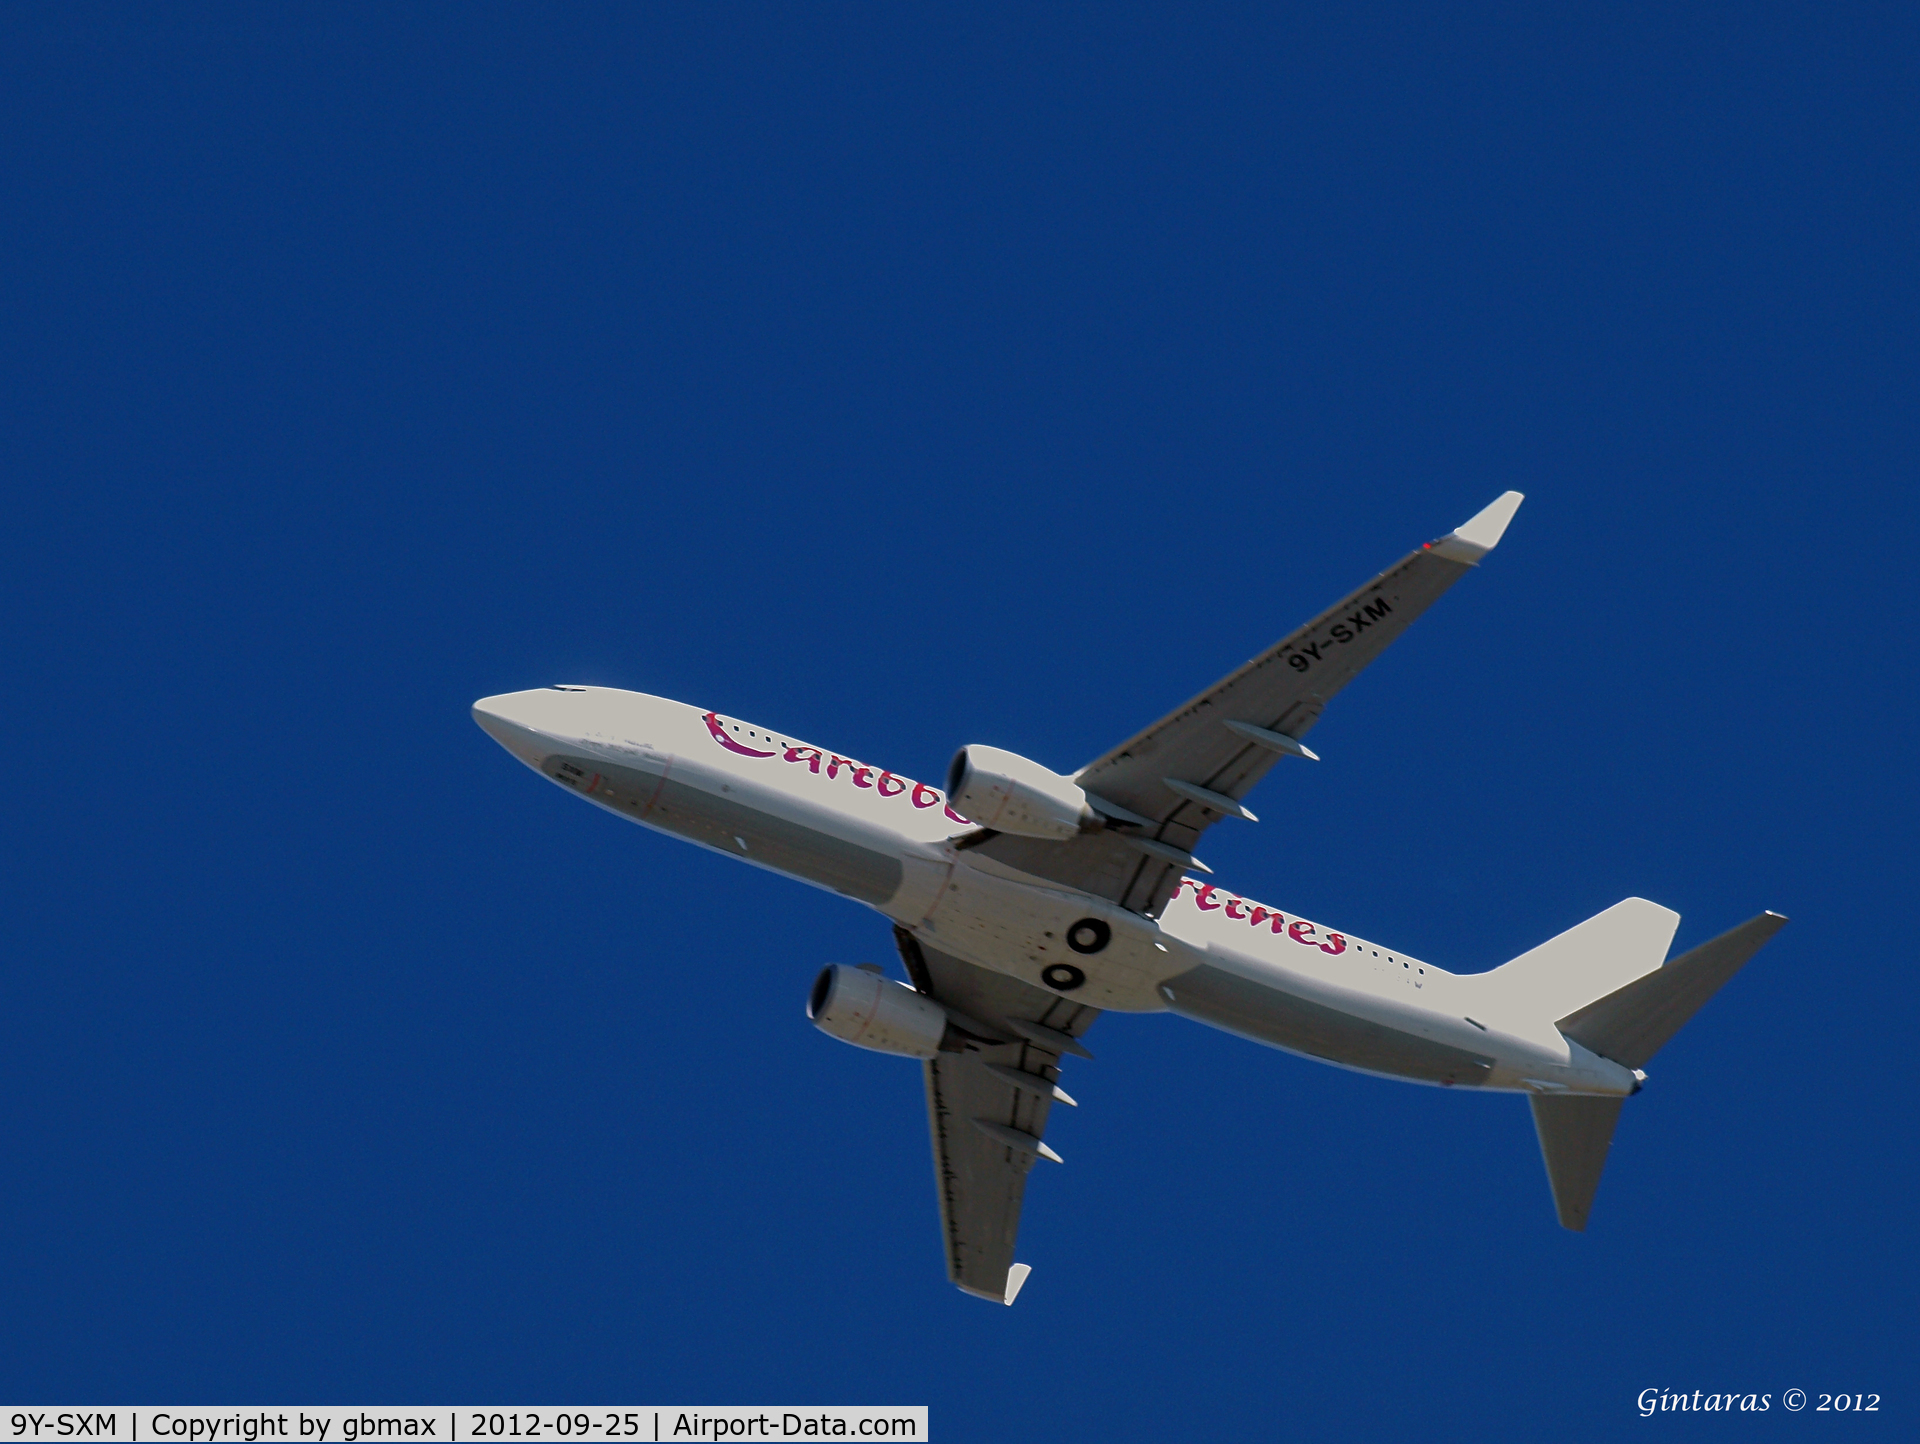 9Y-SXM, 2011 Boeing 737-8HO C/N 37935, On approach to JFK, over Mineola, NY